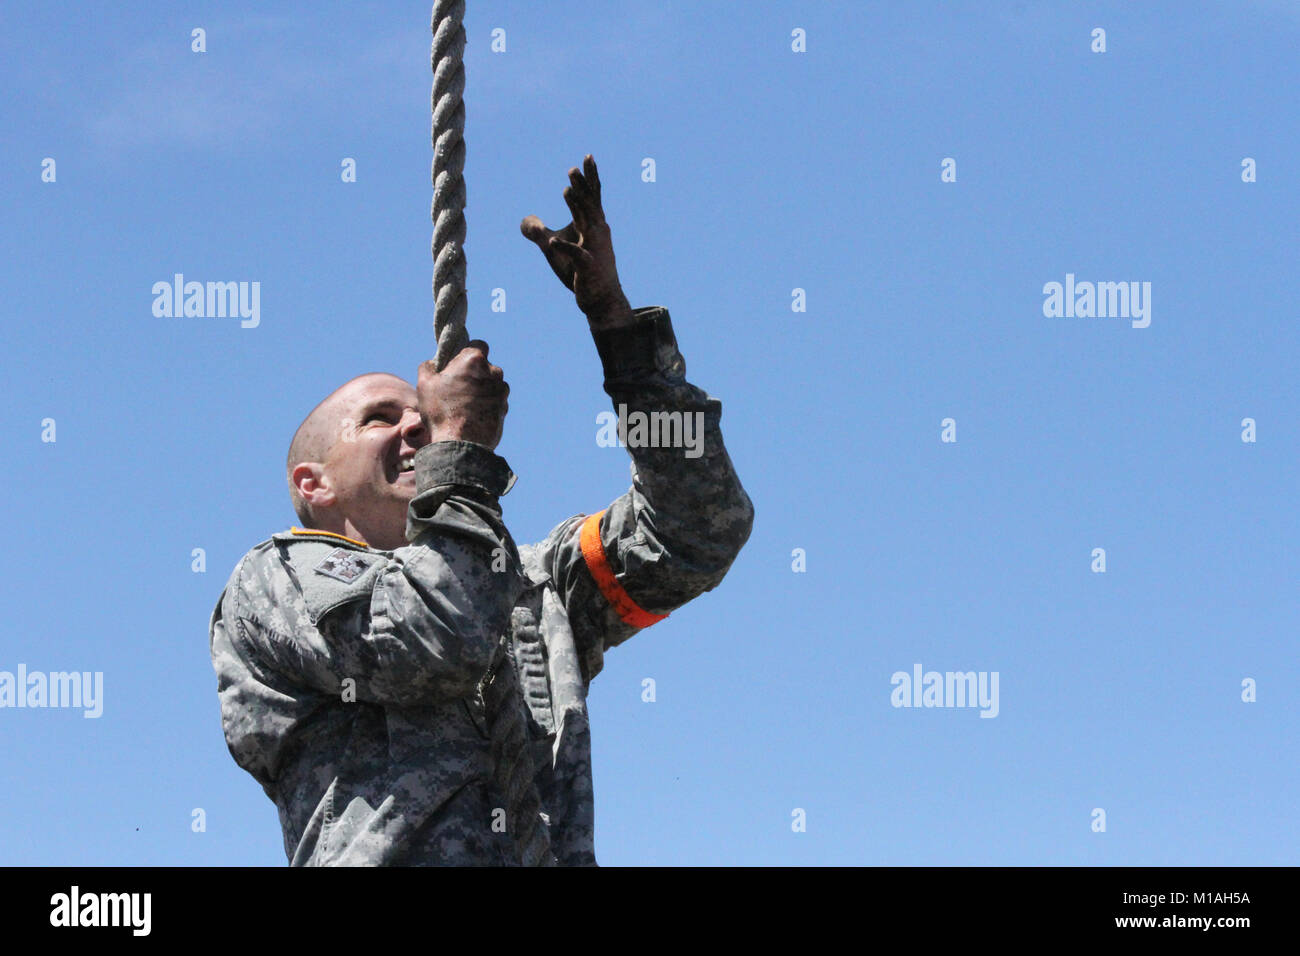 Utah Army National Guardsman Sgt. Peter R. Wiedmeier grabs a rope in the obstacle course event May 16 during the 2017 Army National Guard Region 7 Best Warrior Competition May 15-19 at Camp San Luis Obispo, California. (U.S. Army National Guard photo by Staff Sgt. Eddie Siguenza) Stock Photo